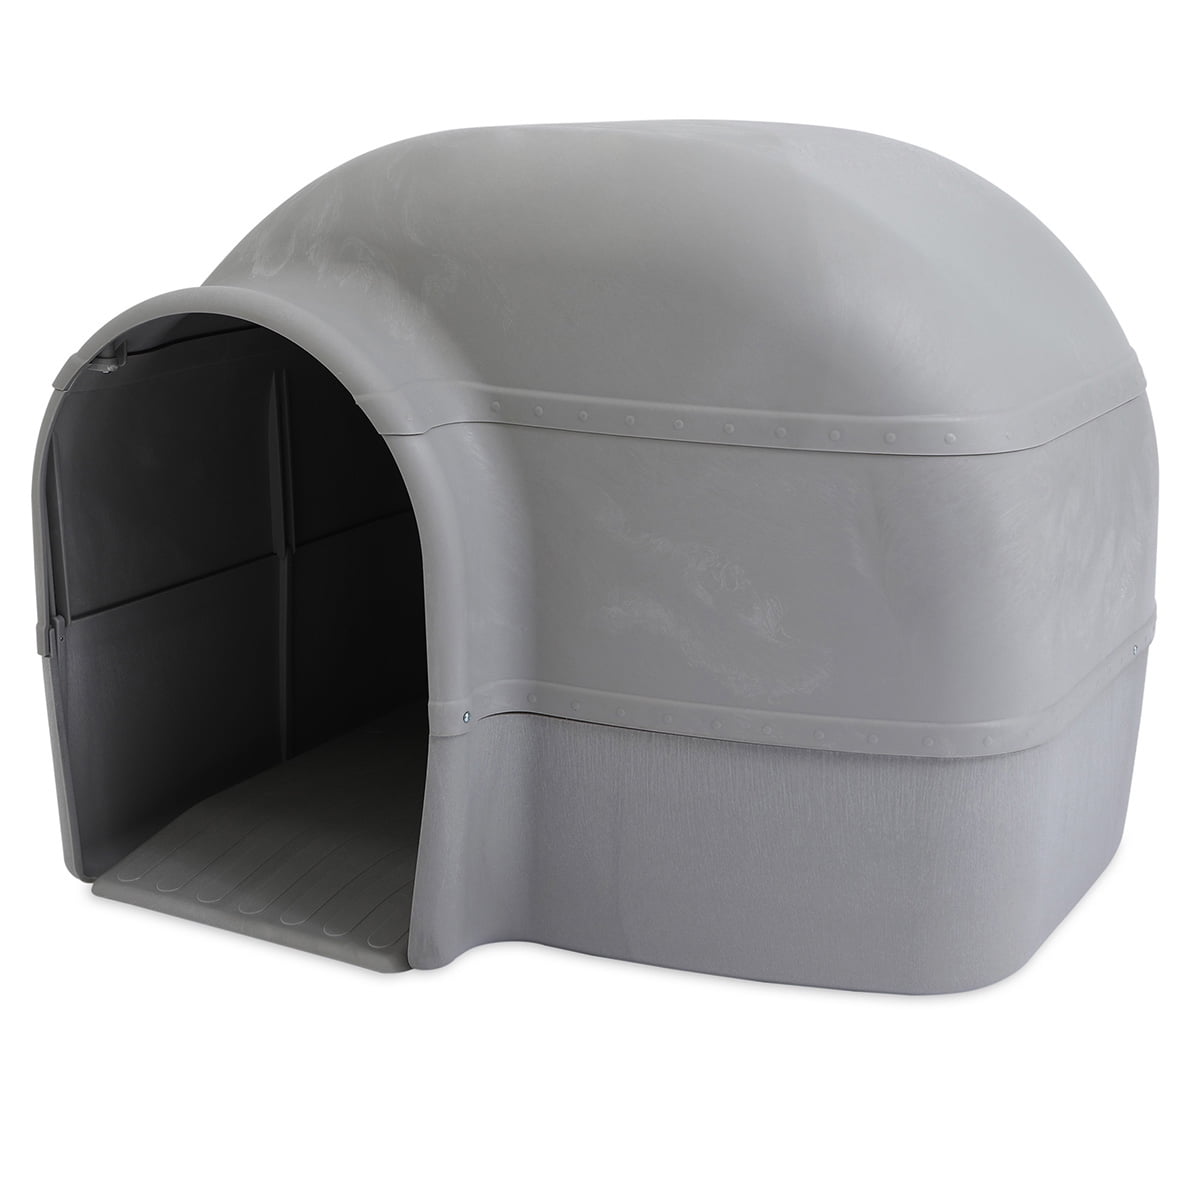 Anniepaw Foldable Washable Pet Bed Indoor Cat Dog House Kennel – AnniePaw  Wear